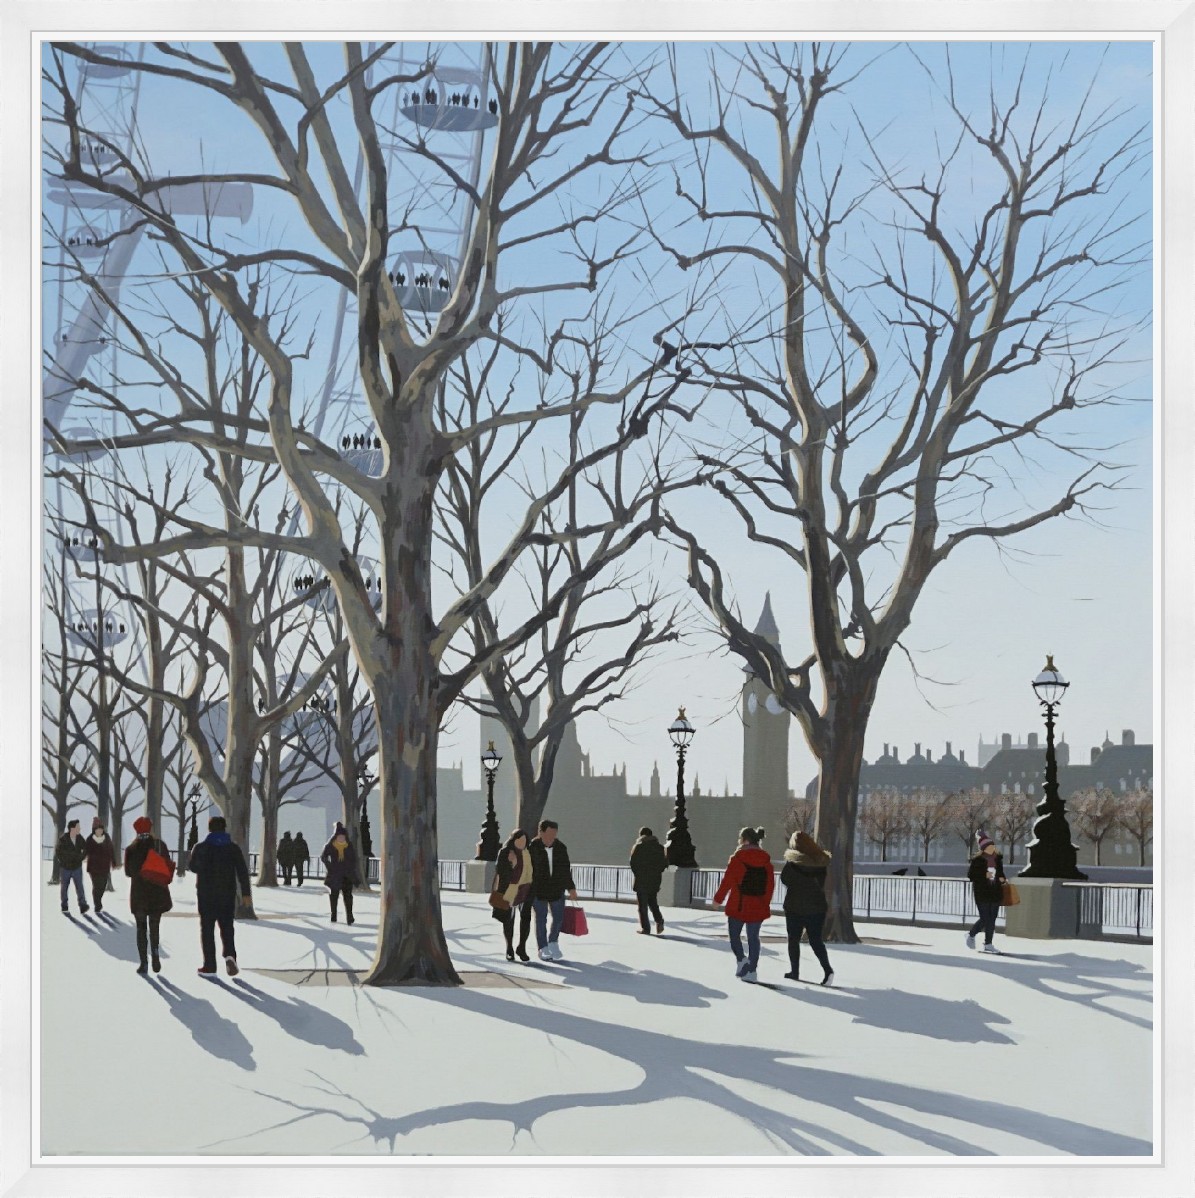 Bright Winter Morning, South Bank by Jo Quigley